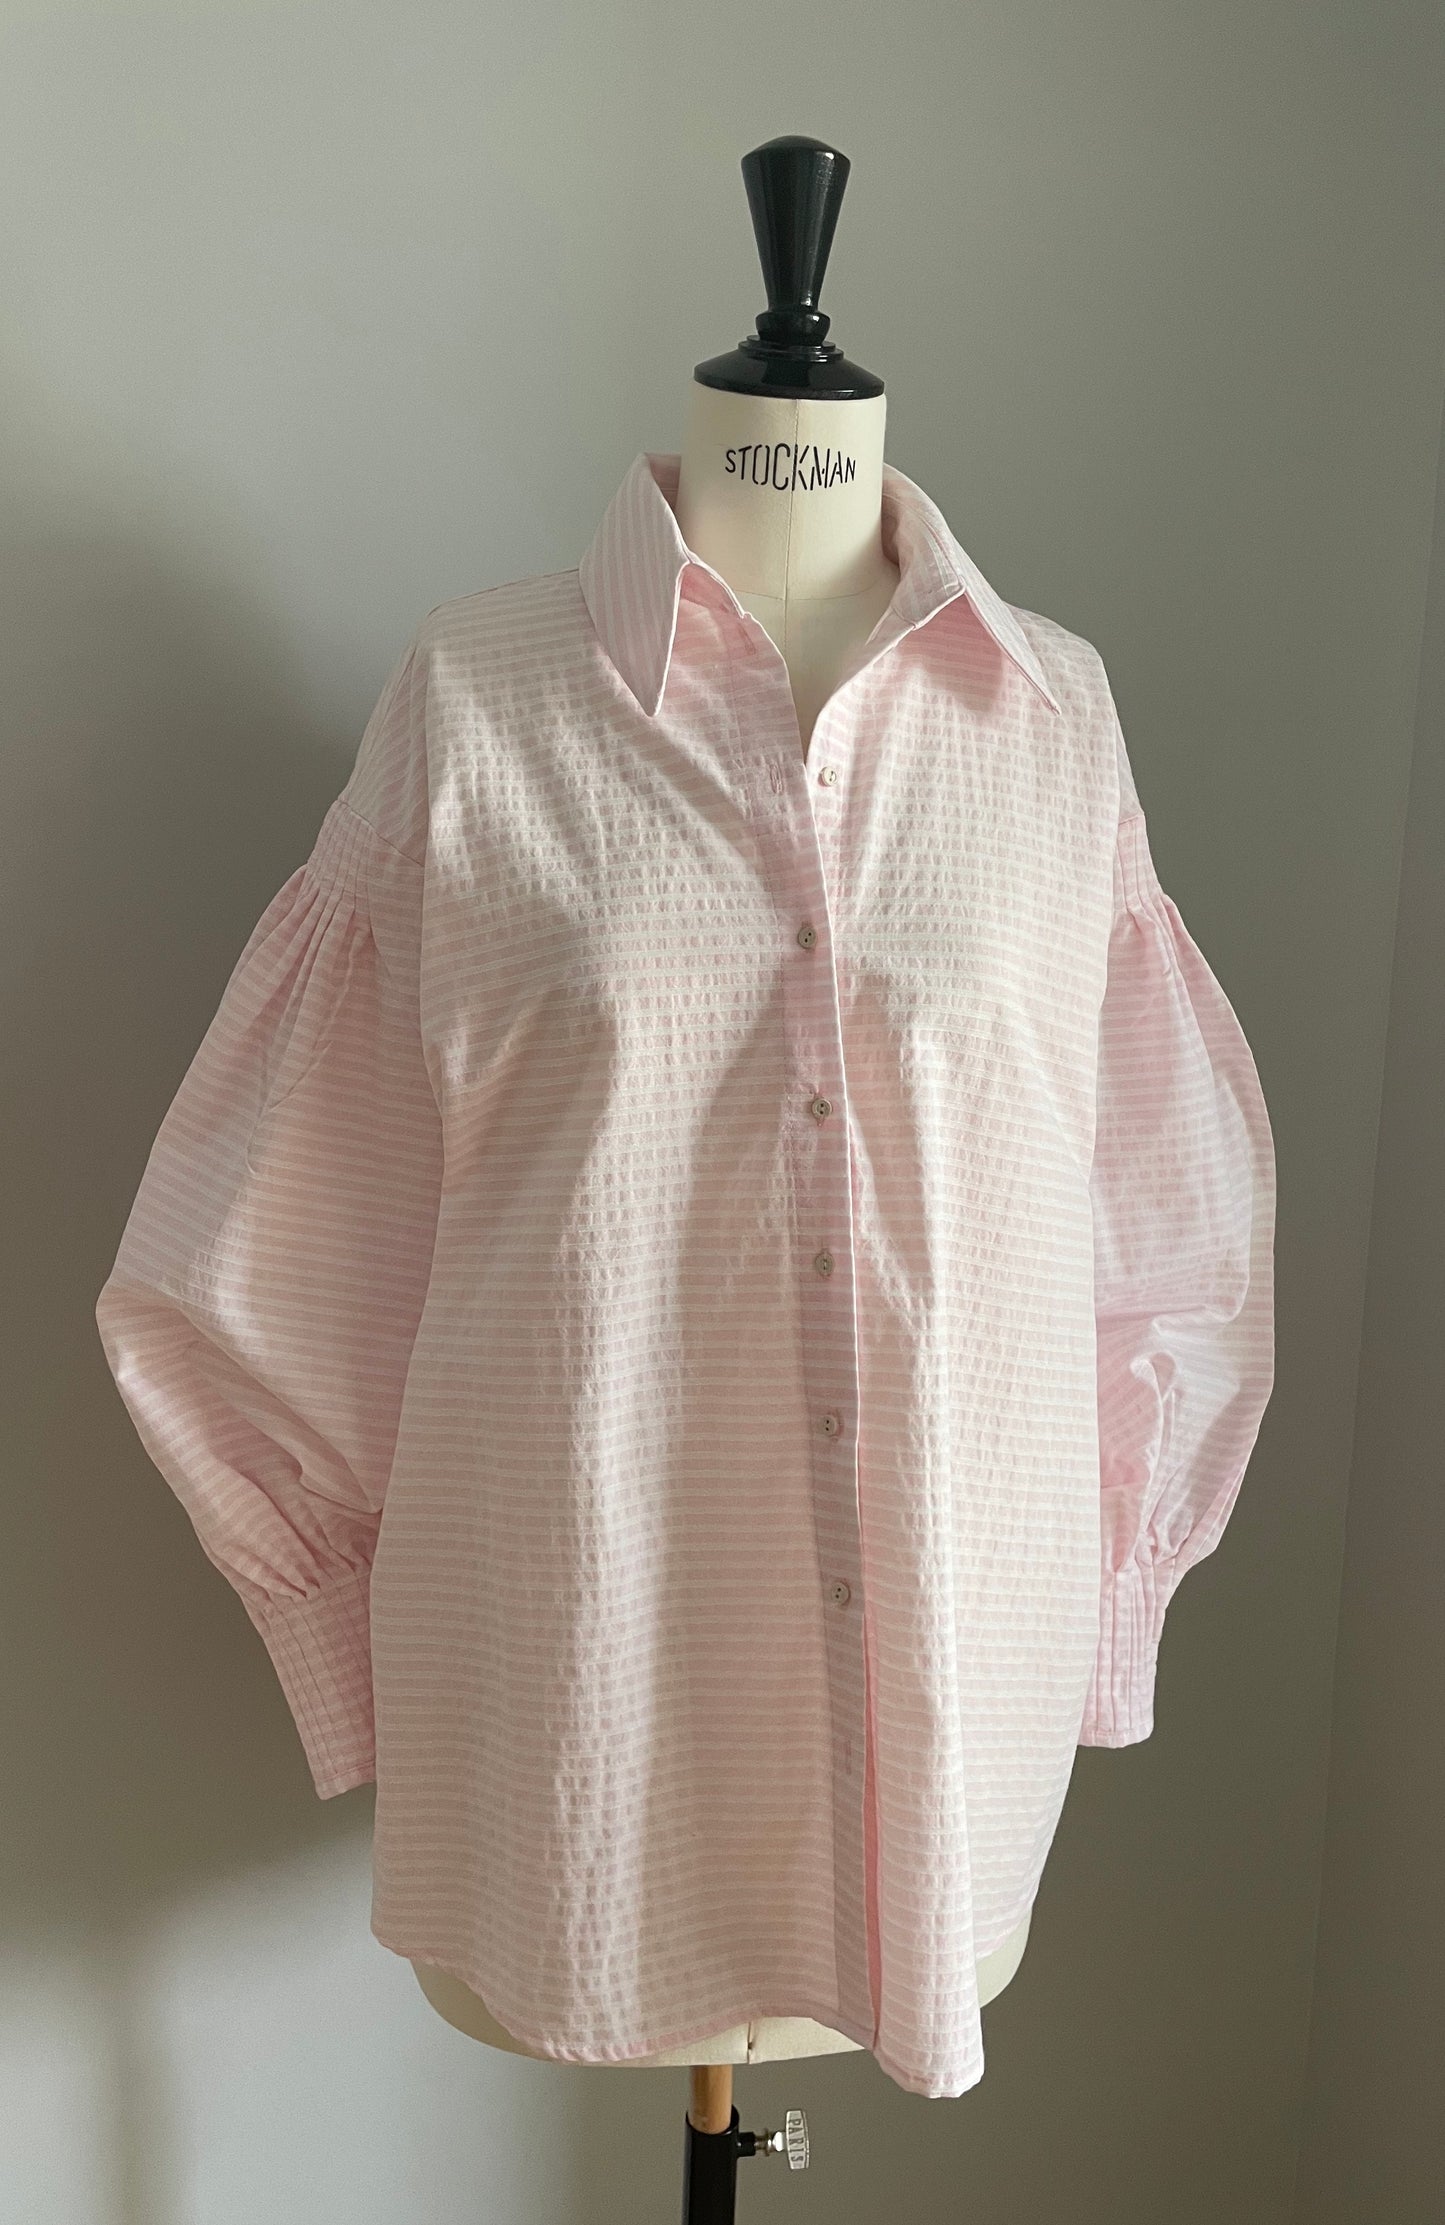 SOLE SHIRT - PINK LINES